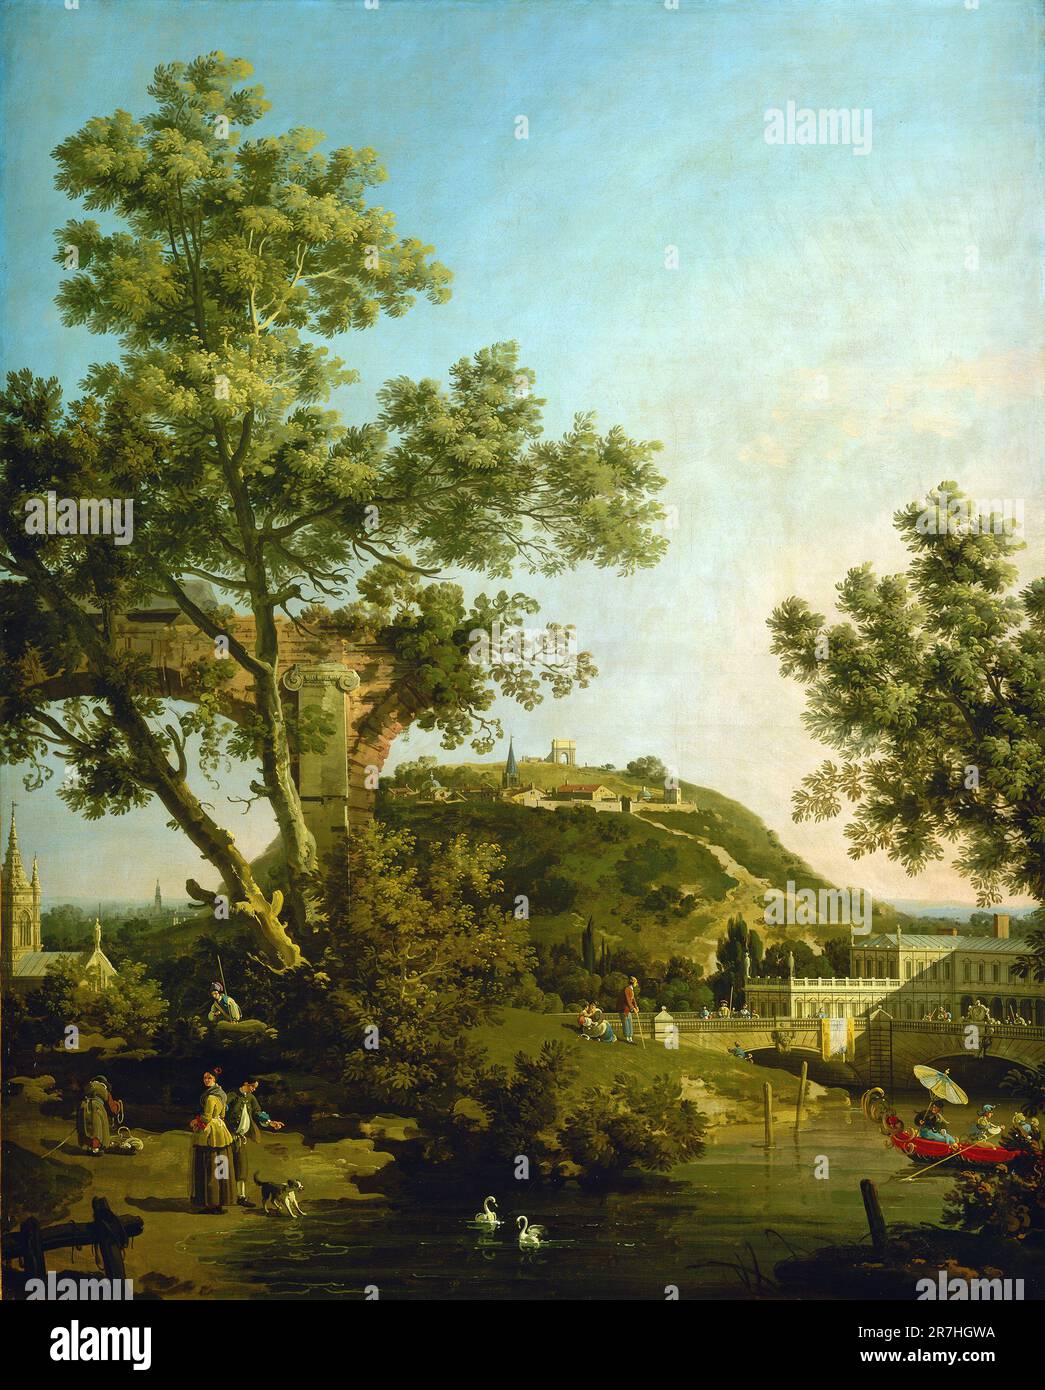 English Landscape Capriccio with a Palace  painted by the Venetian painter Giovanni Antonio Canal, commonly known as Canaletto, in c. 1754.  Canaletto specialised in realsitic city scenes (called Verduti) but occasionally he painted from his imagination, which he called Capriccio. Stock Photo